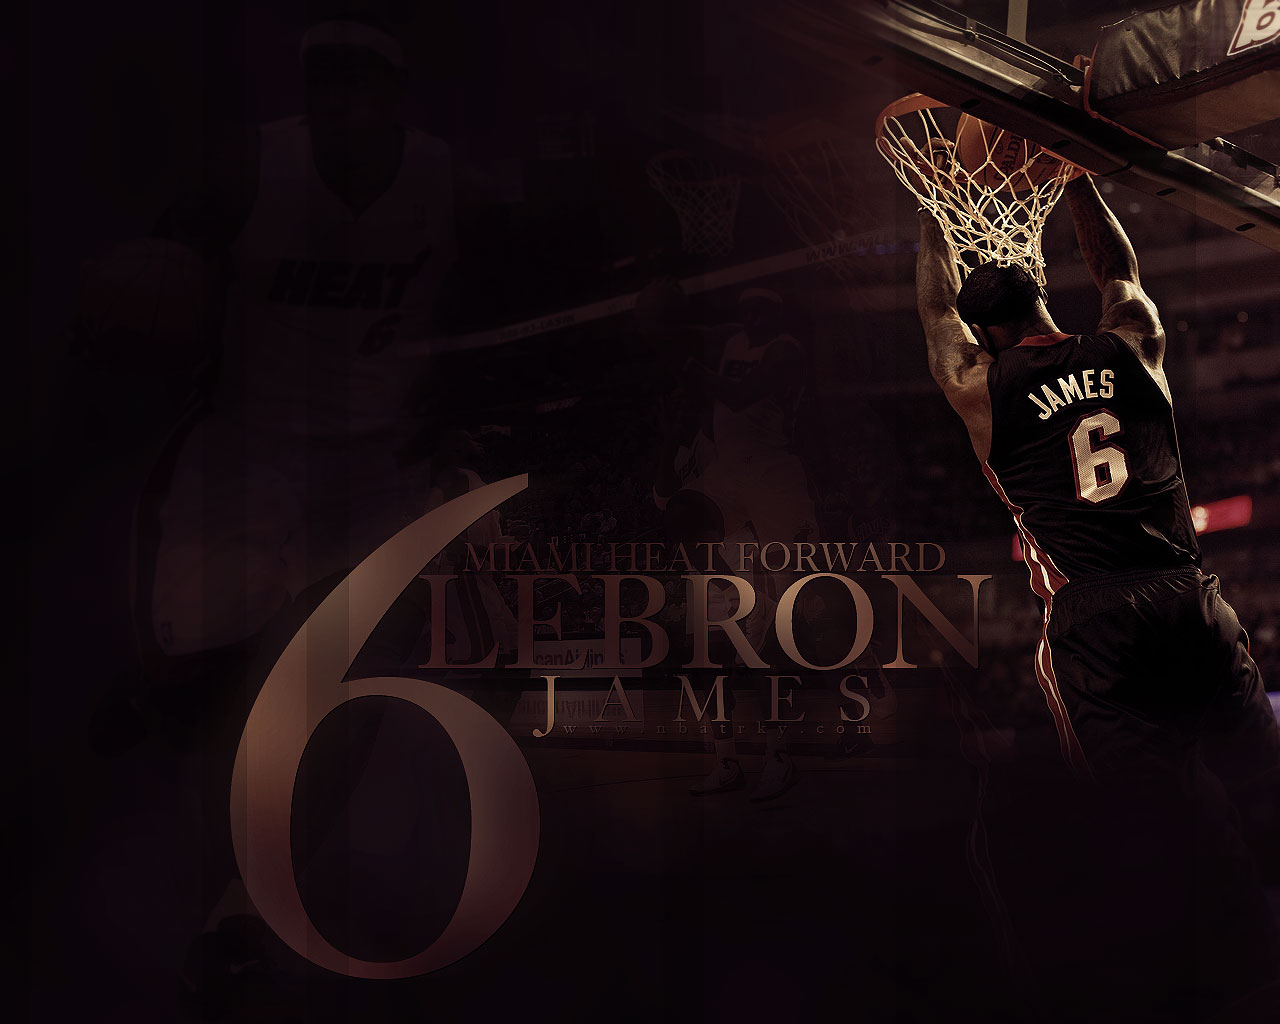 Second is wallpaper of LeBron James, again :P, this time made of picture of